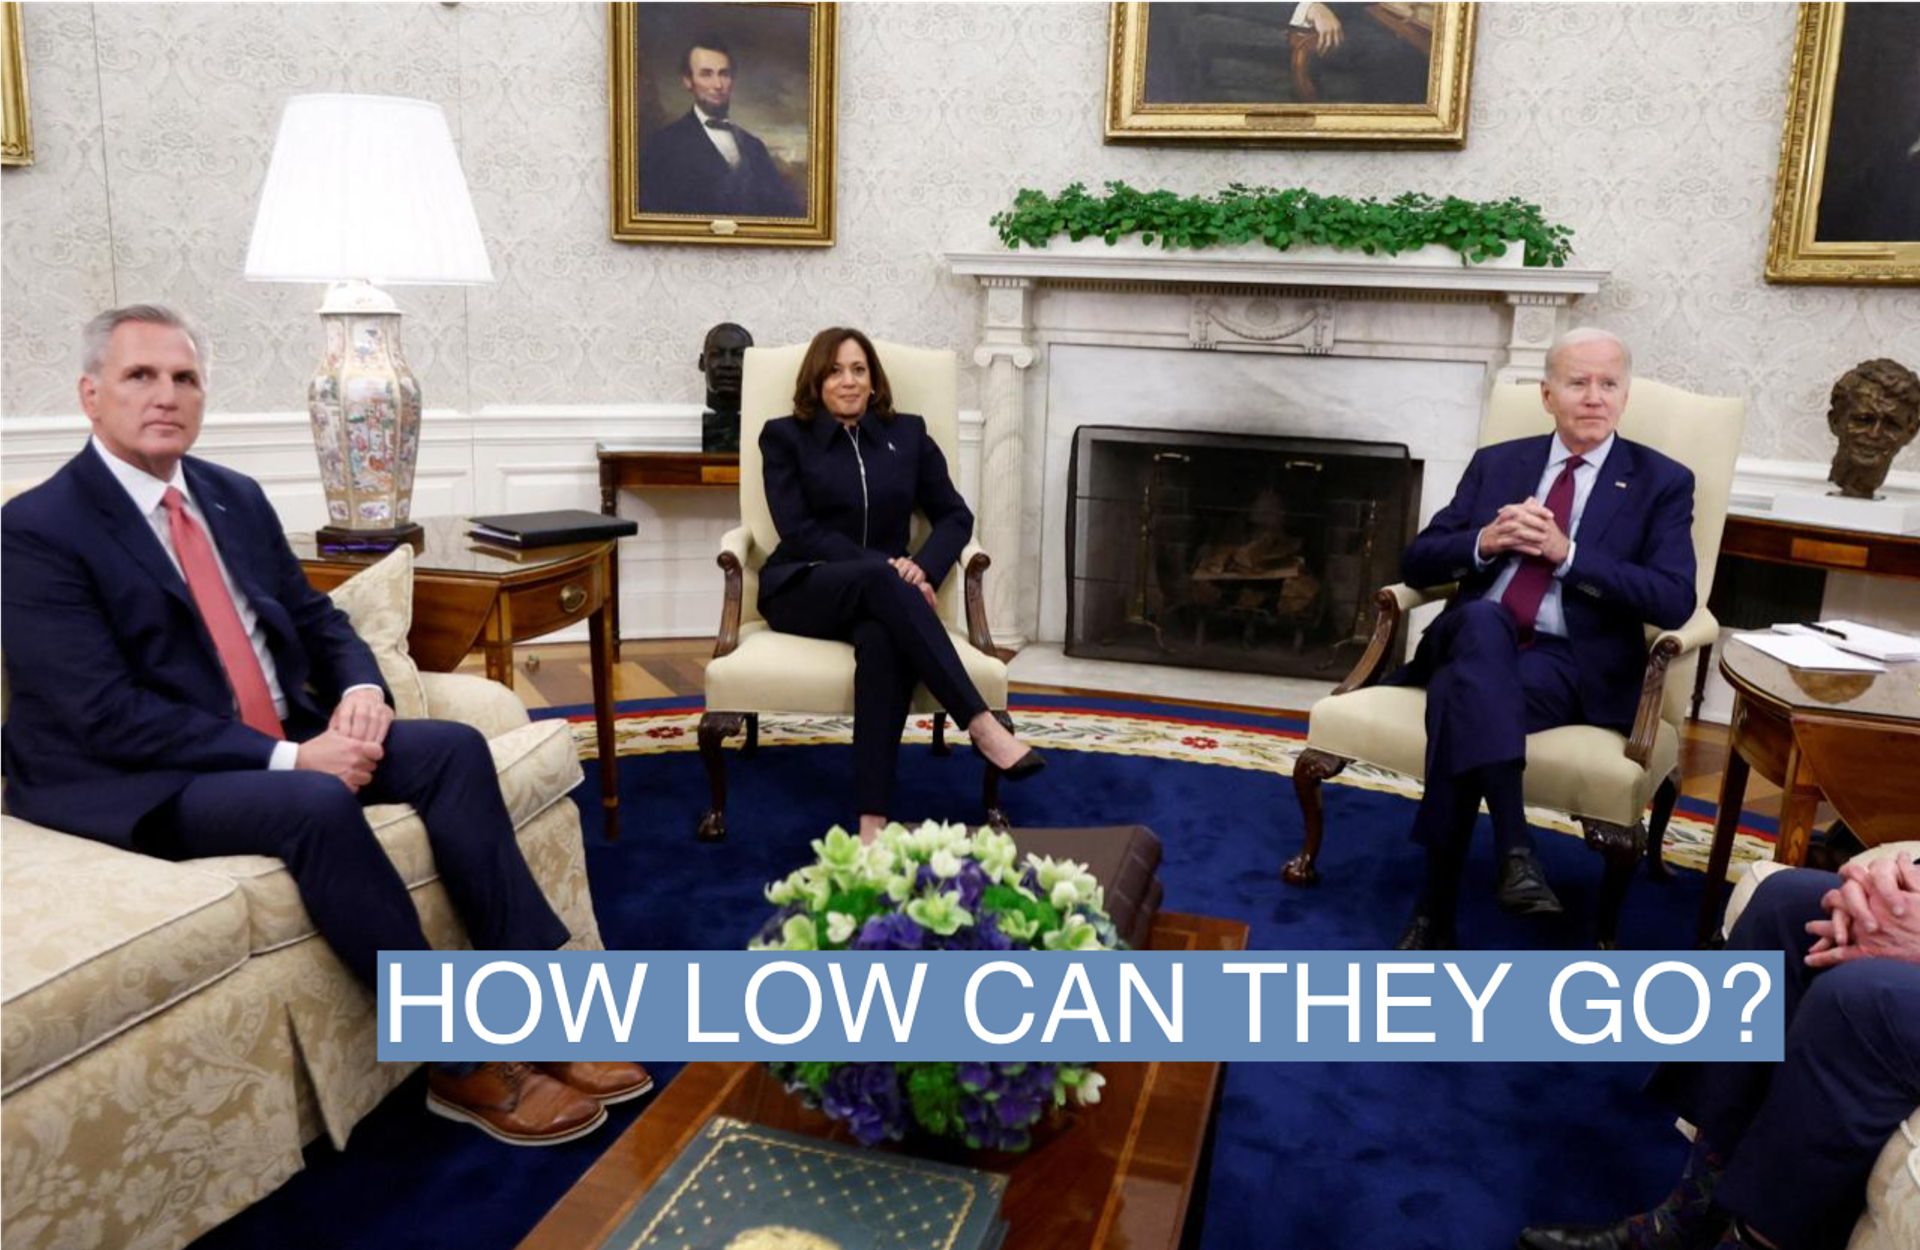 U.S. President Joe Biden hosts debt limit talks with House Speaker Kevin McCarthy (R-CA), Vice President Kamala Harris and other congressional leaders in the Oval Office at the White House in Washington, U.S., May 16, 2023. 